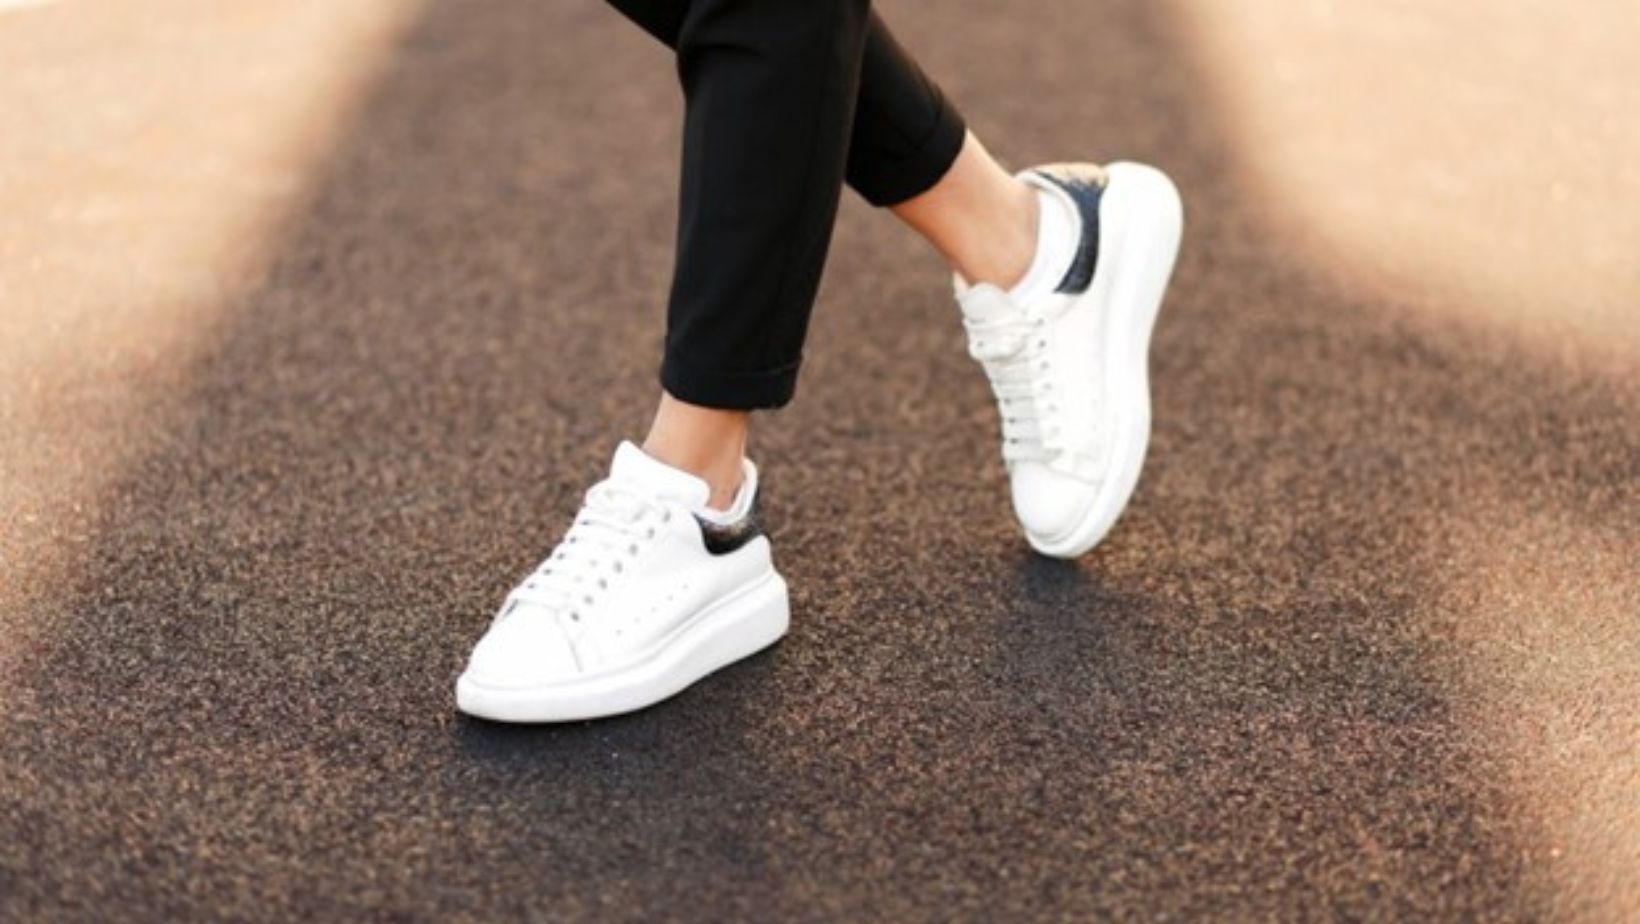 Helpful Tips for Finding Great Sneakers for Women